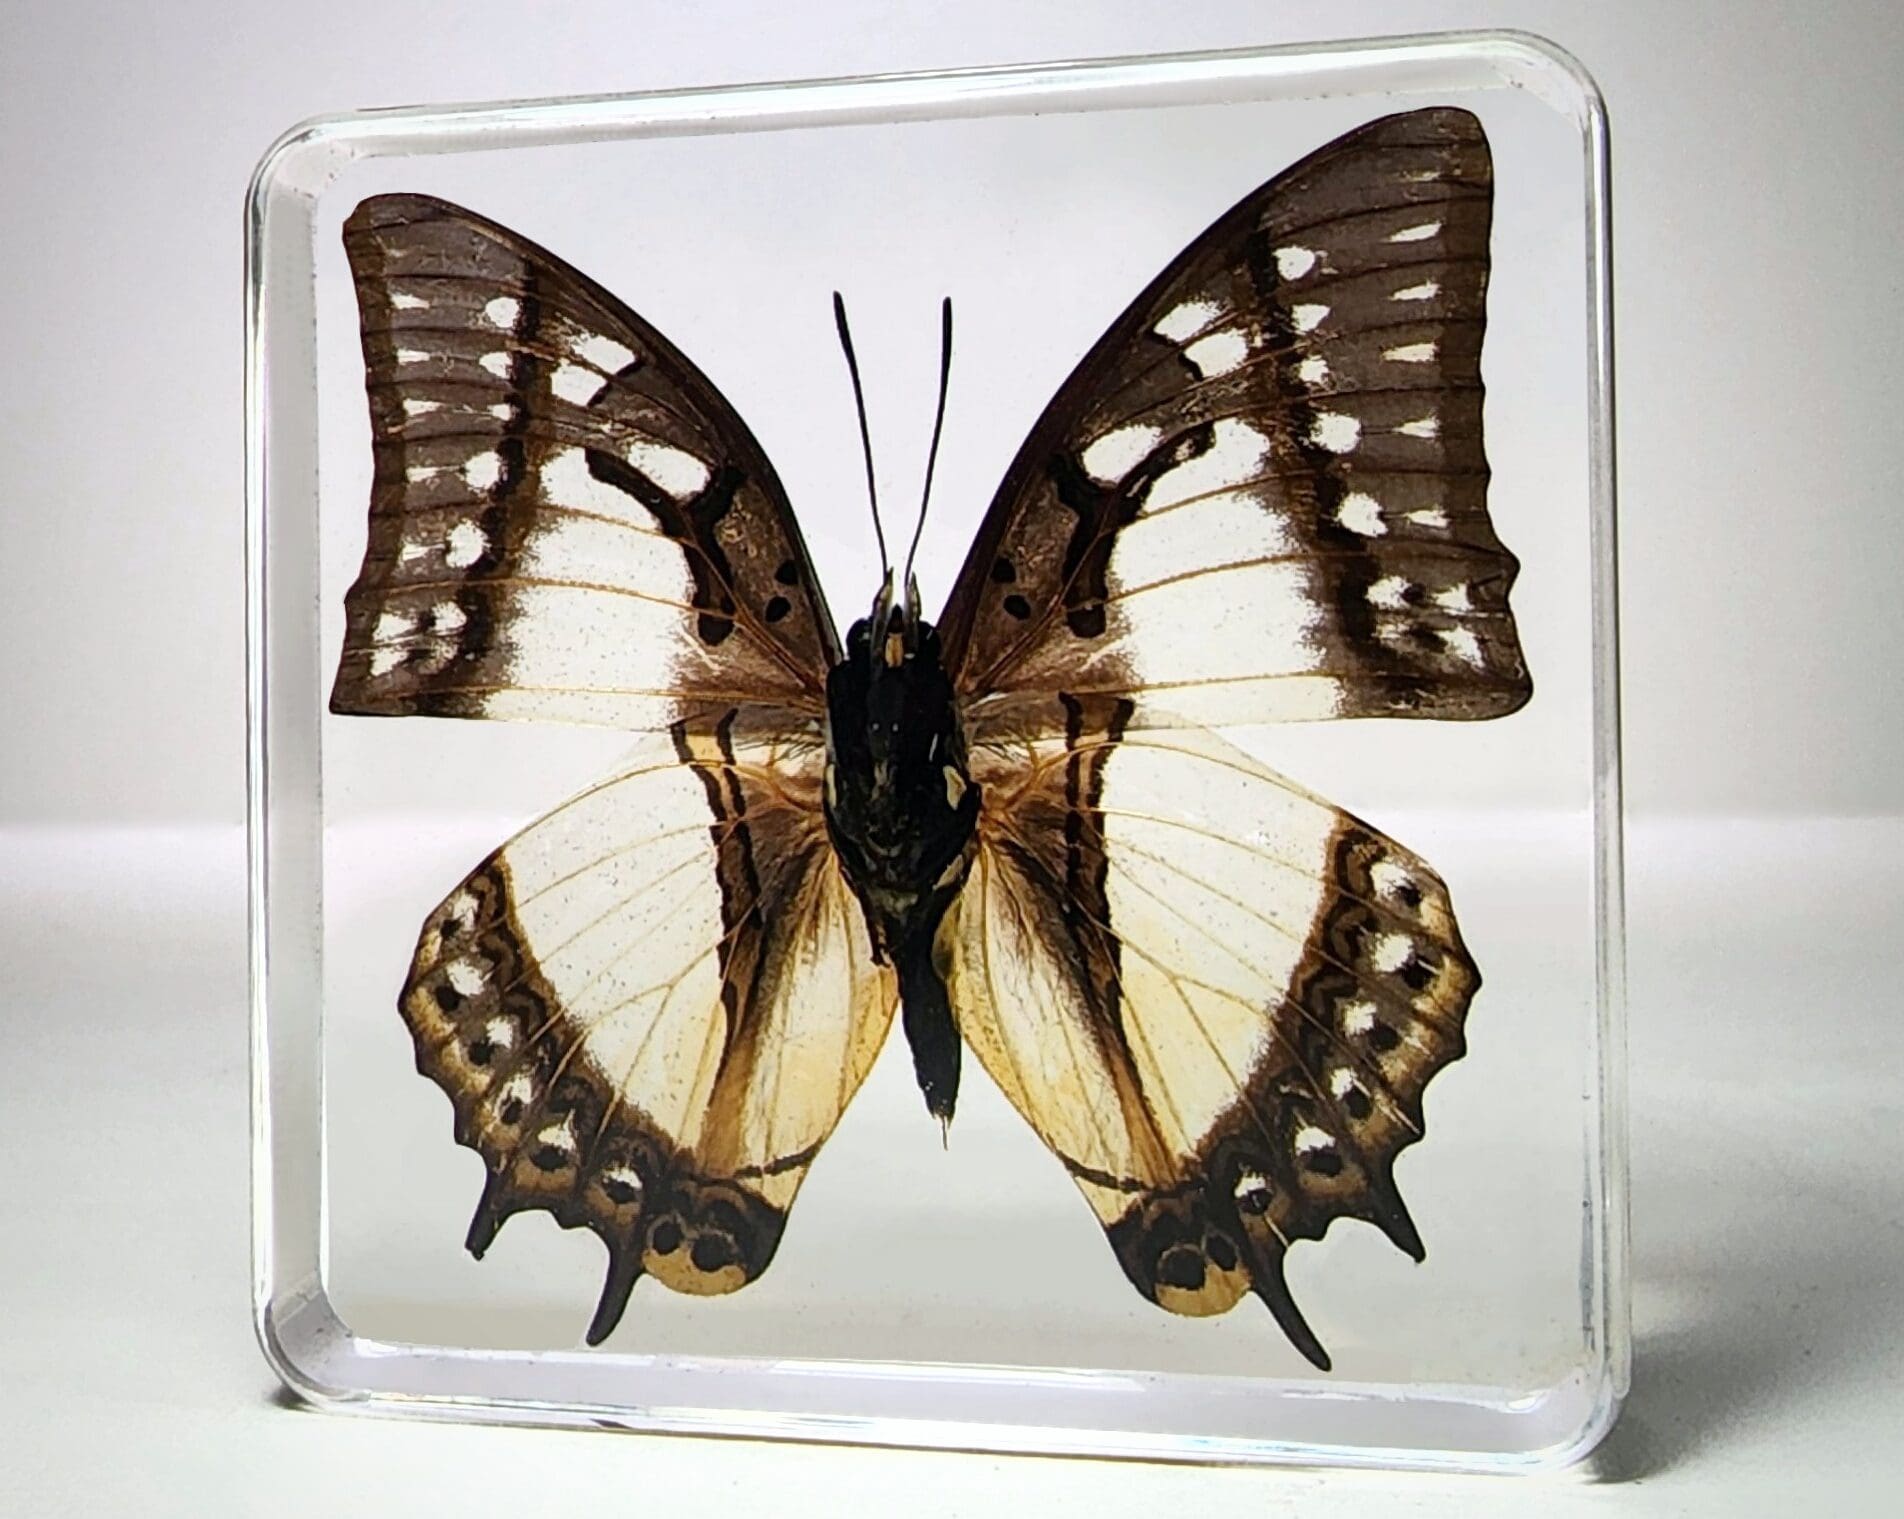 Real butterfly in Resin, Preserved Butterfly, China-Nawab Butterfly